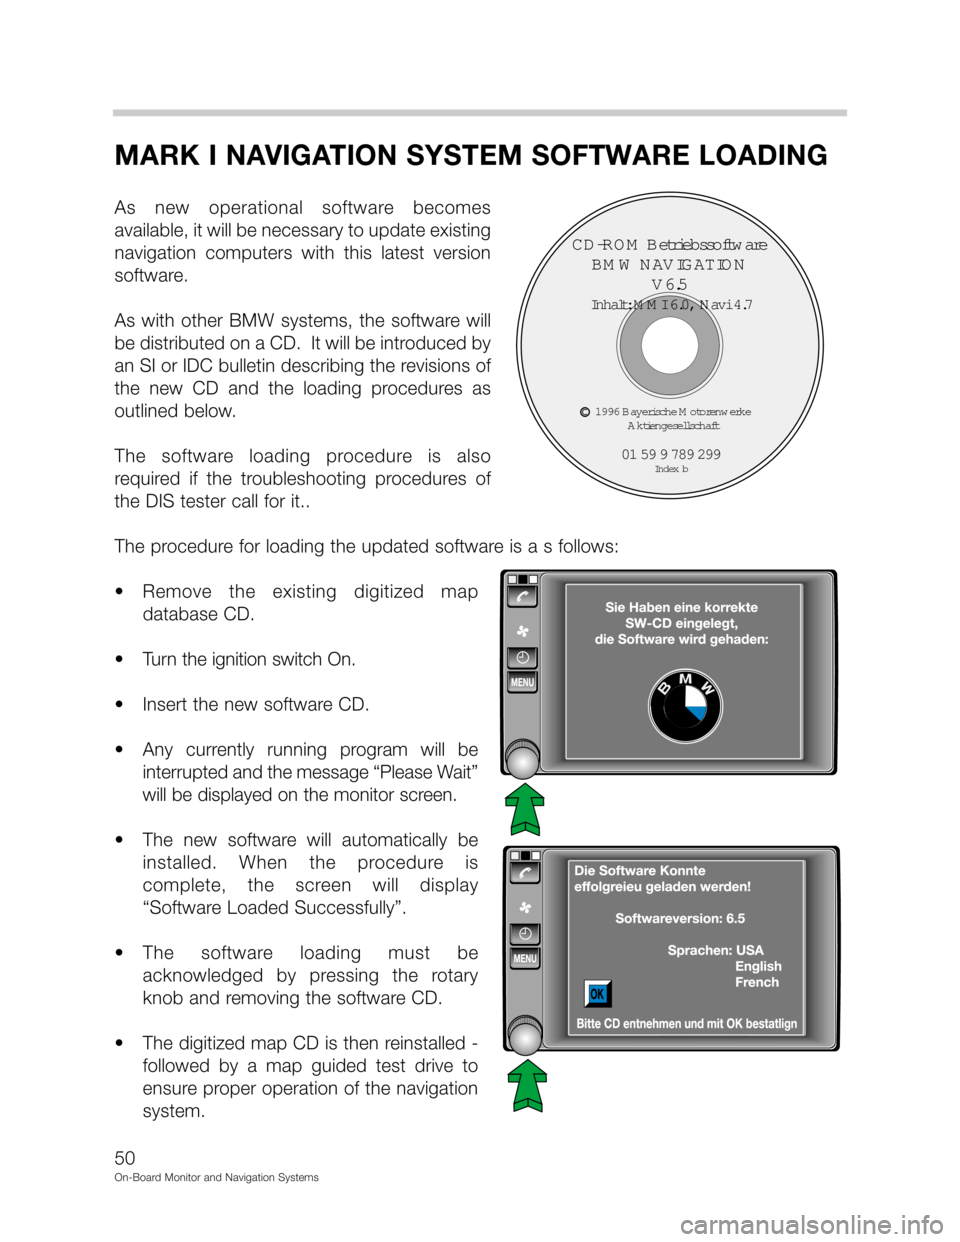 BMW 5 SERIES 1997 E39 On Board Monitor System Workshop Manual 	>
4
8

	5@3
8
 
% 

 % 	
&6%




&
 	
 %   &
%
 